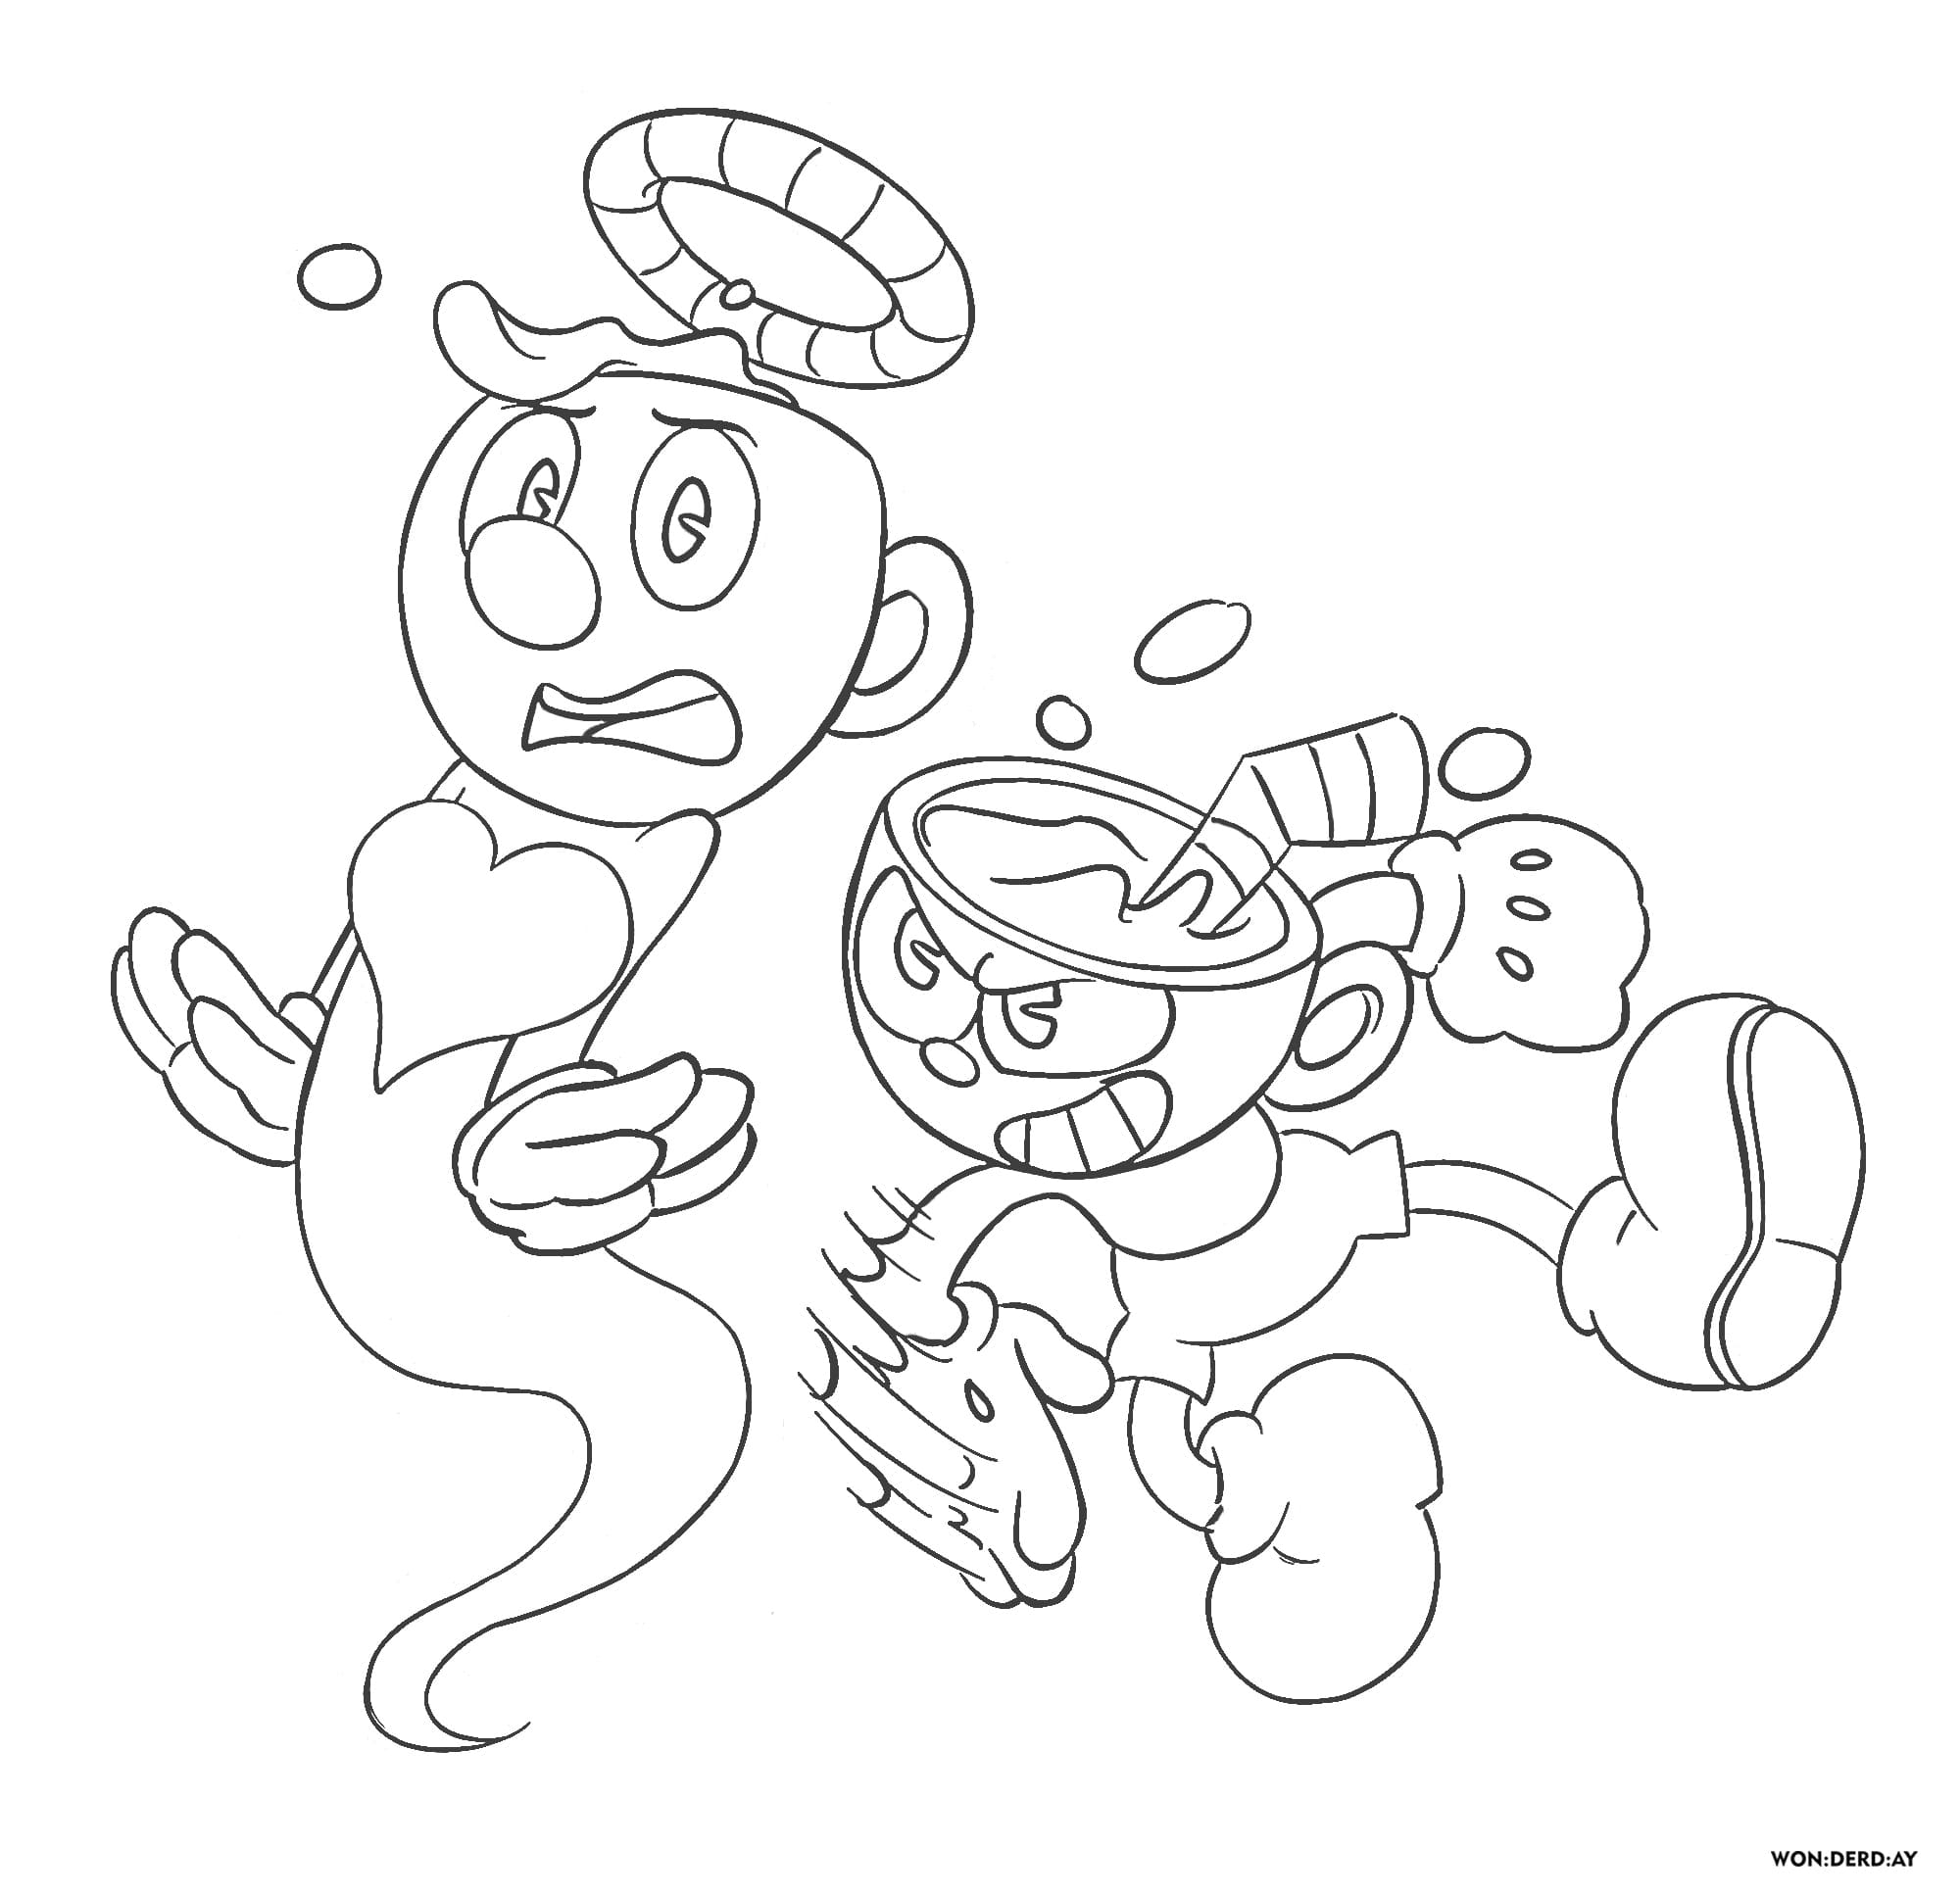 25+ Cuphead Show Coloring Pages - TommyJustice